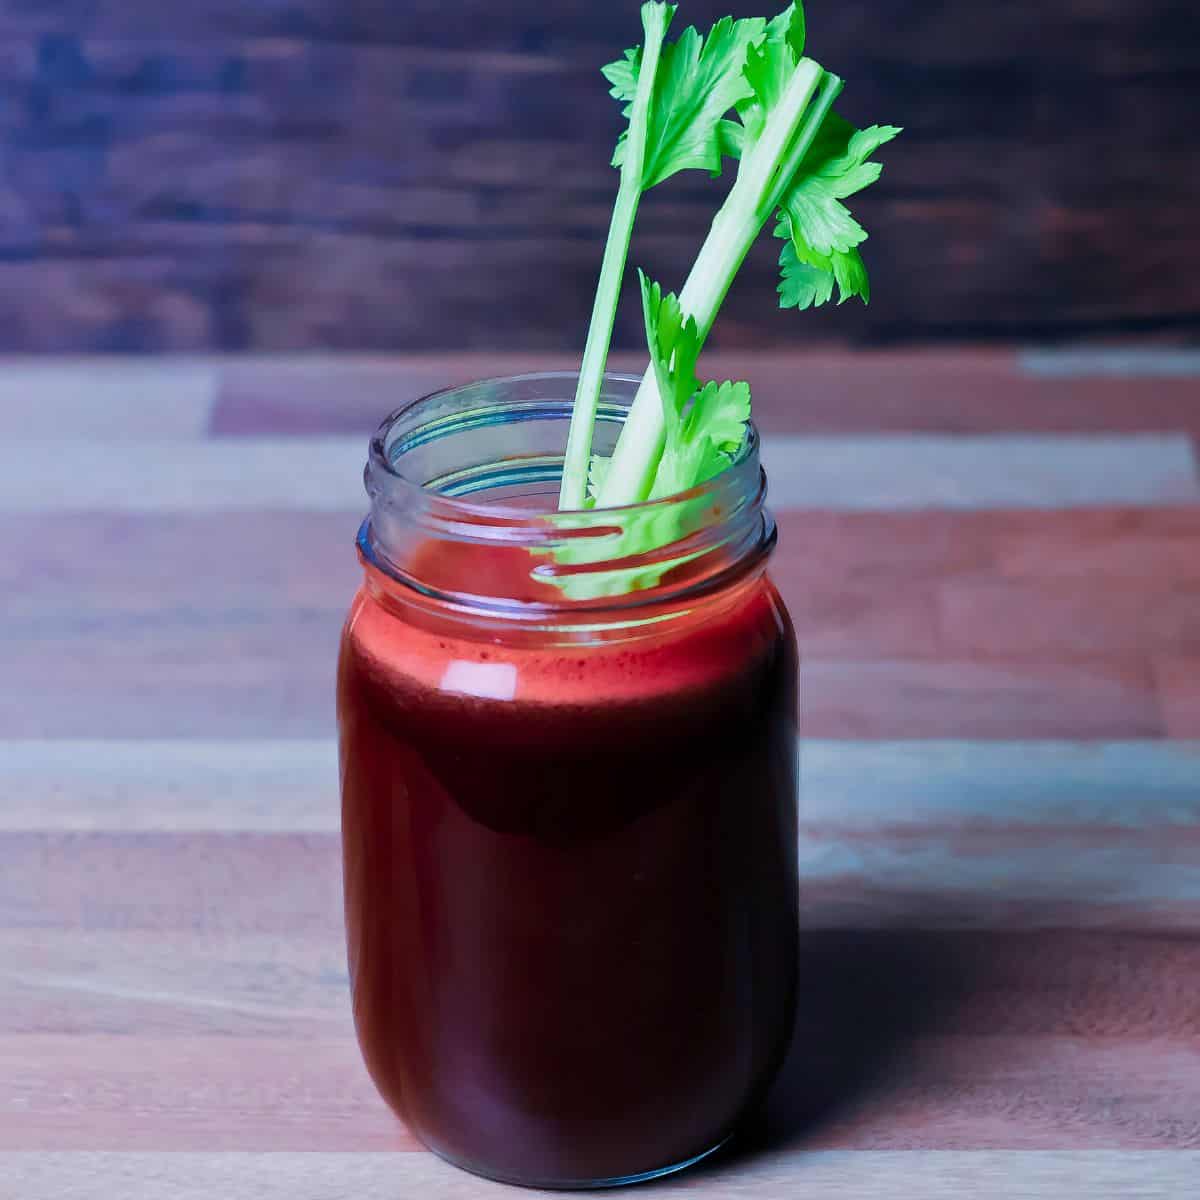 A jar of deep red juice with a stalk of celery as a stirrer on a wooden background, suggesting a freshly made beet-based cleanse juice.